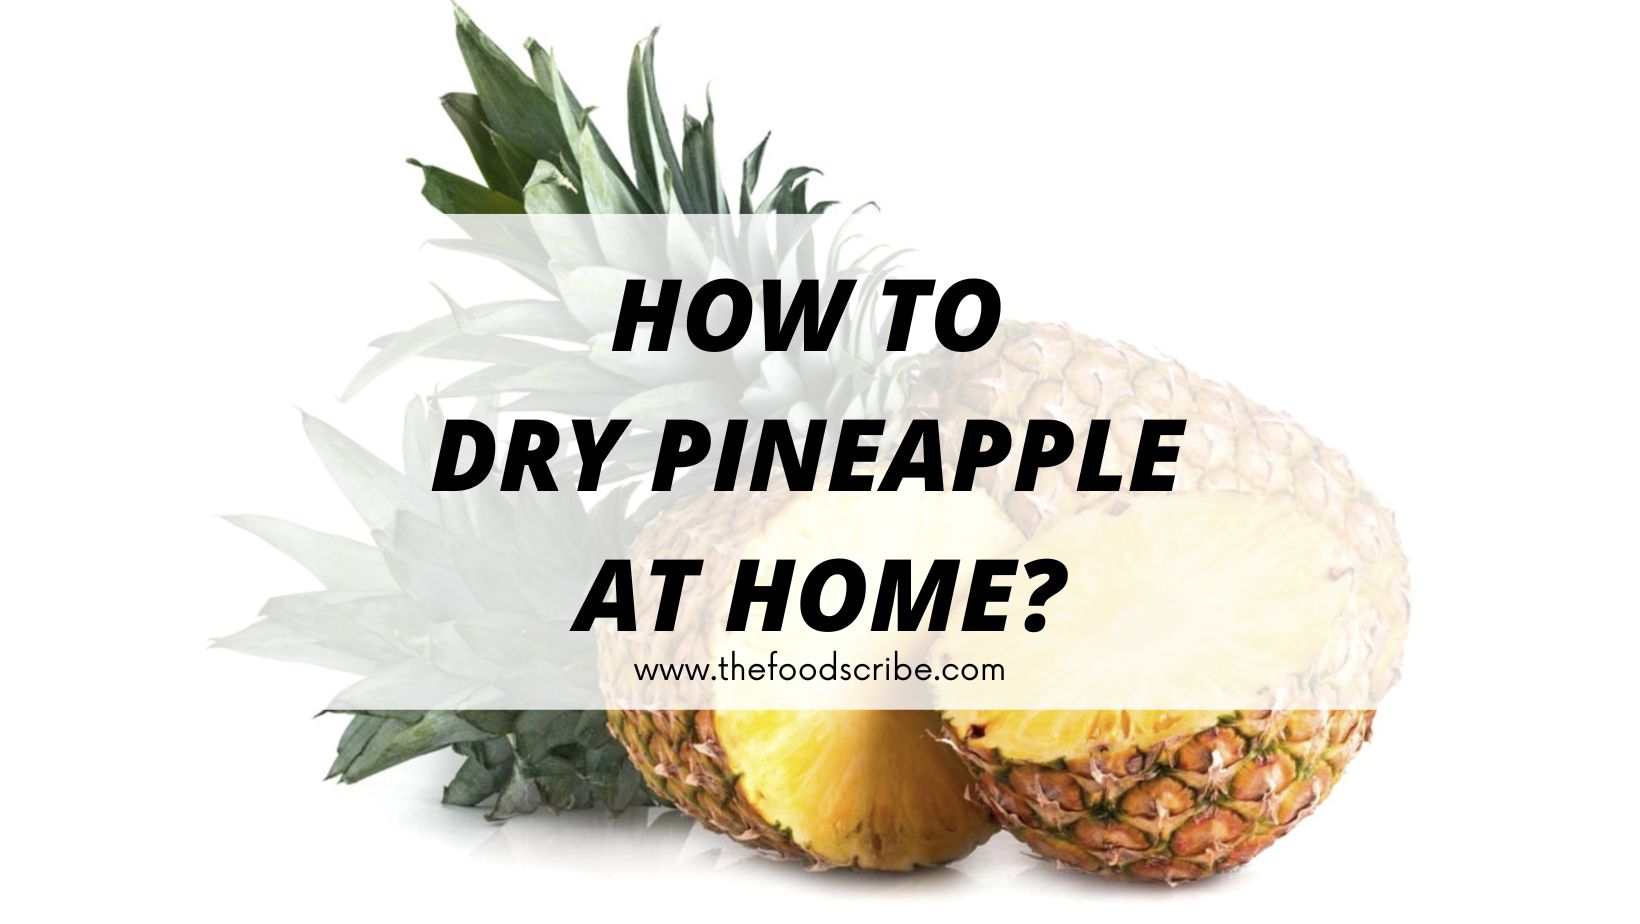 How To Dry Pineapple At Home?